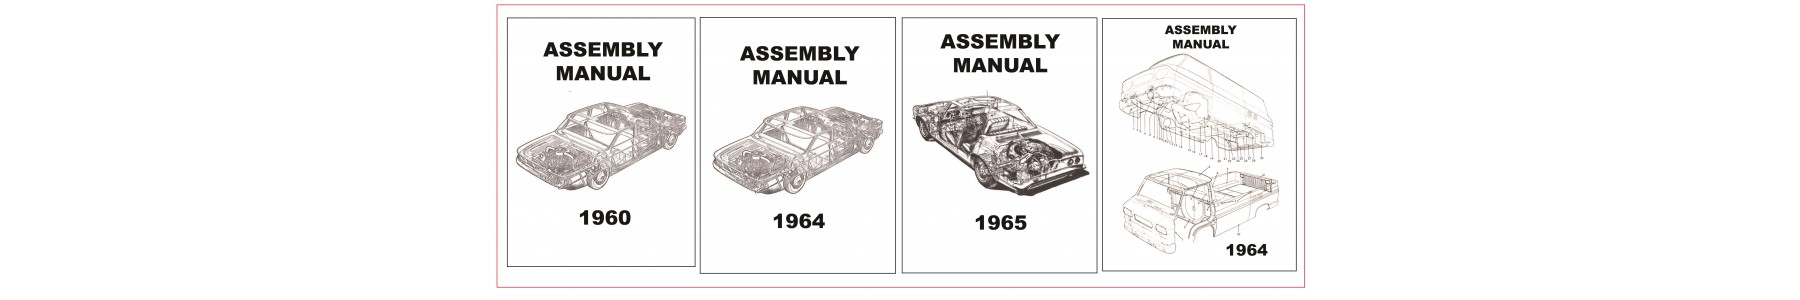 ASSEMBLY MANUALS